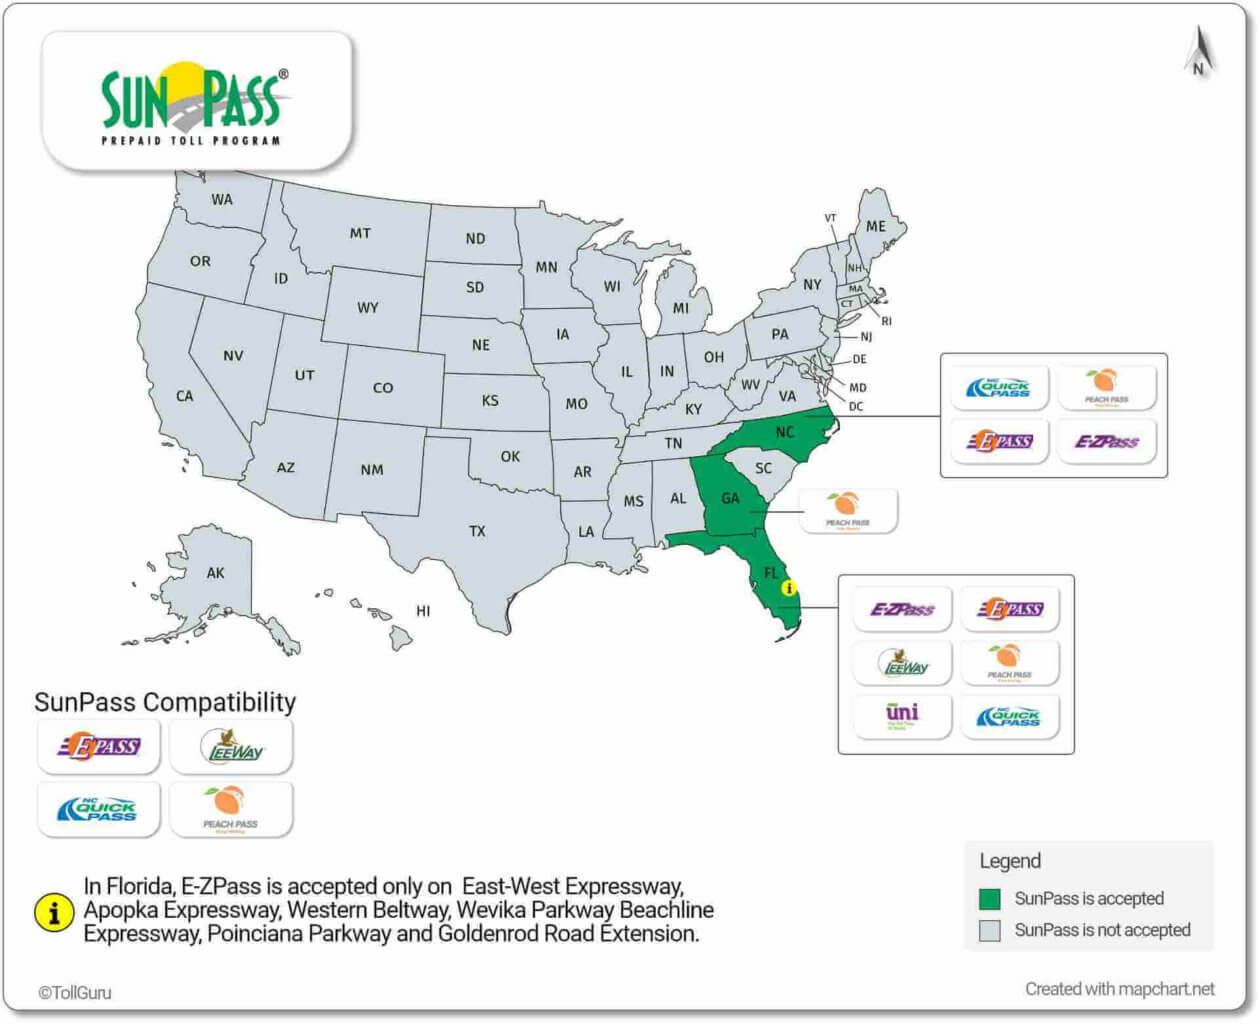 SunPass is accepted in Florida, Georgia, and North Carolina along with PeachPass and NCQuickPass